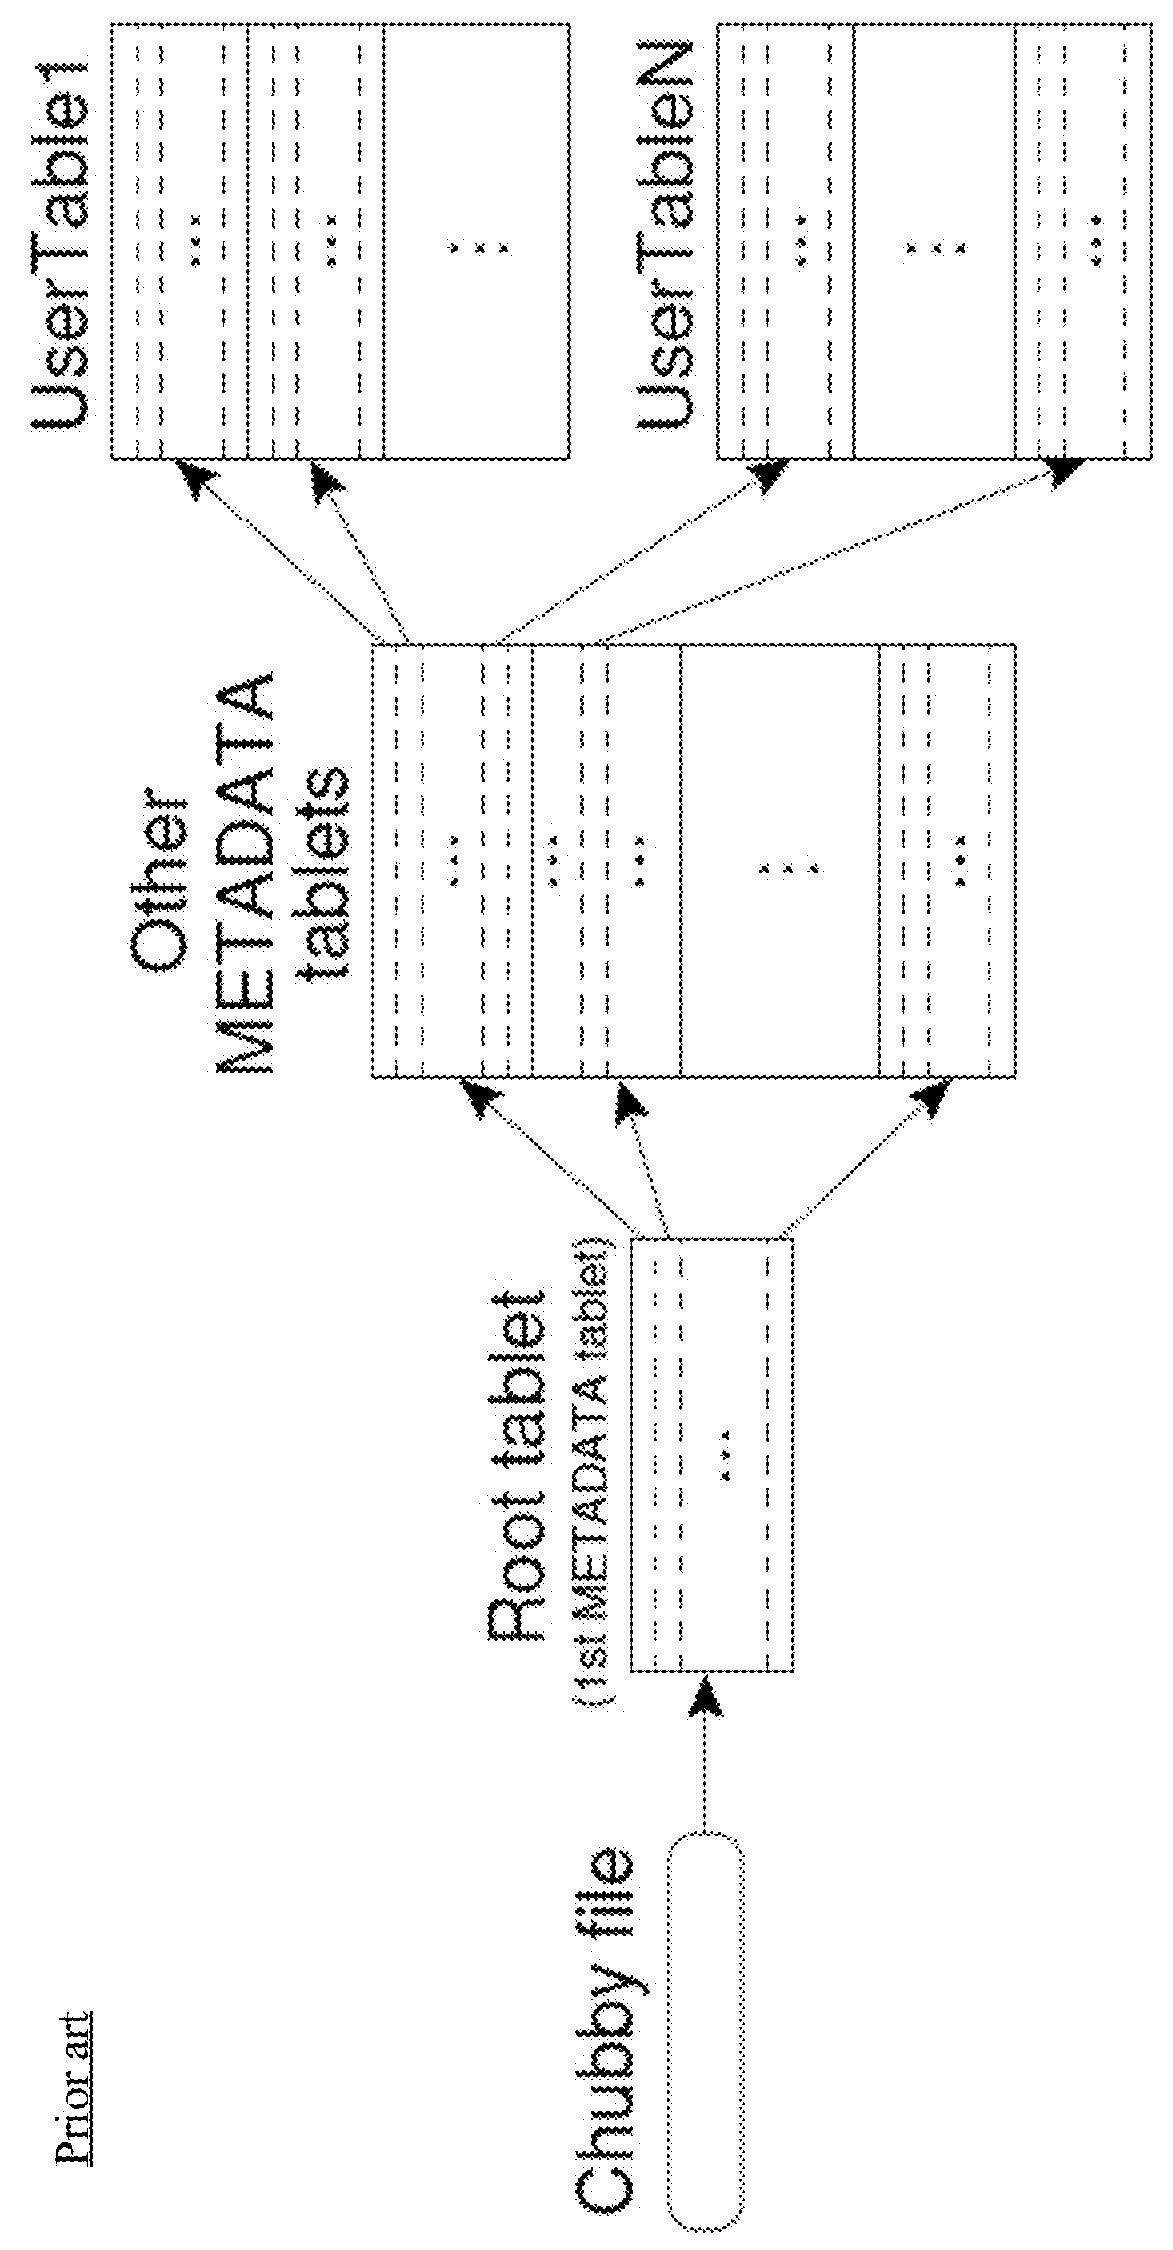 Randomized data distribution in highly parallel database management system